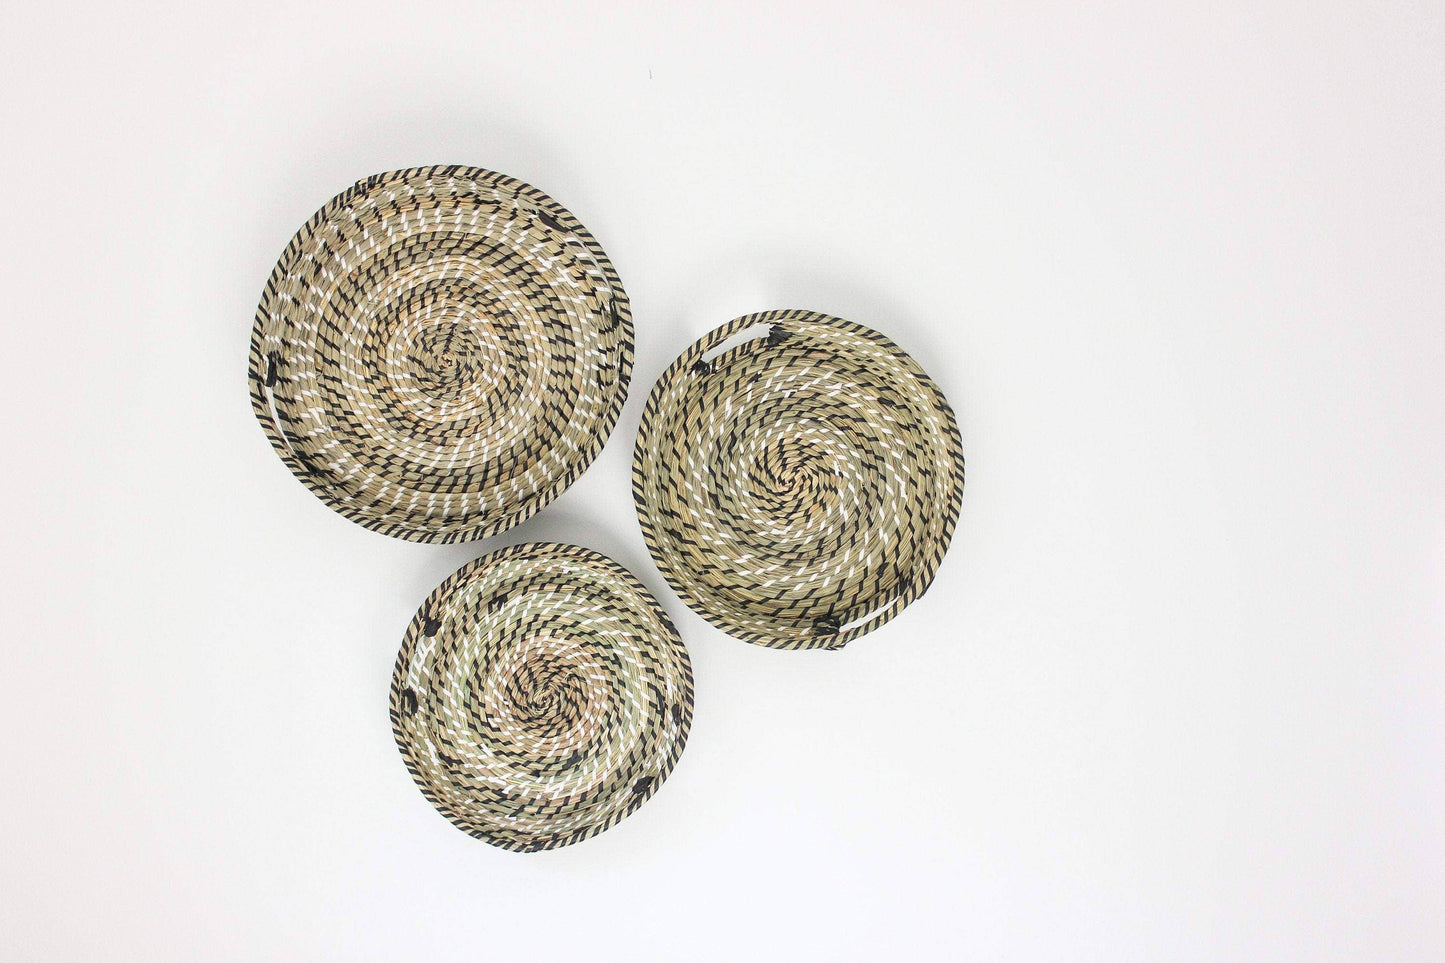 Wall Basket Boho Decor in Contrast Seagrass